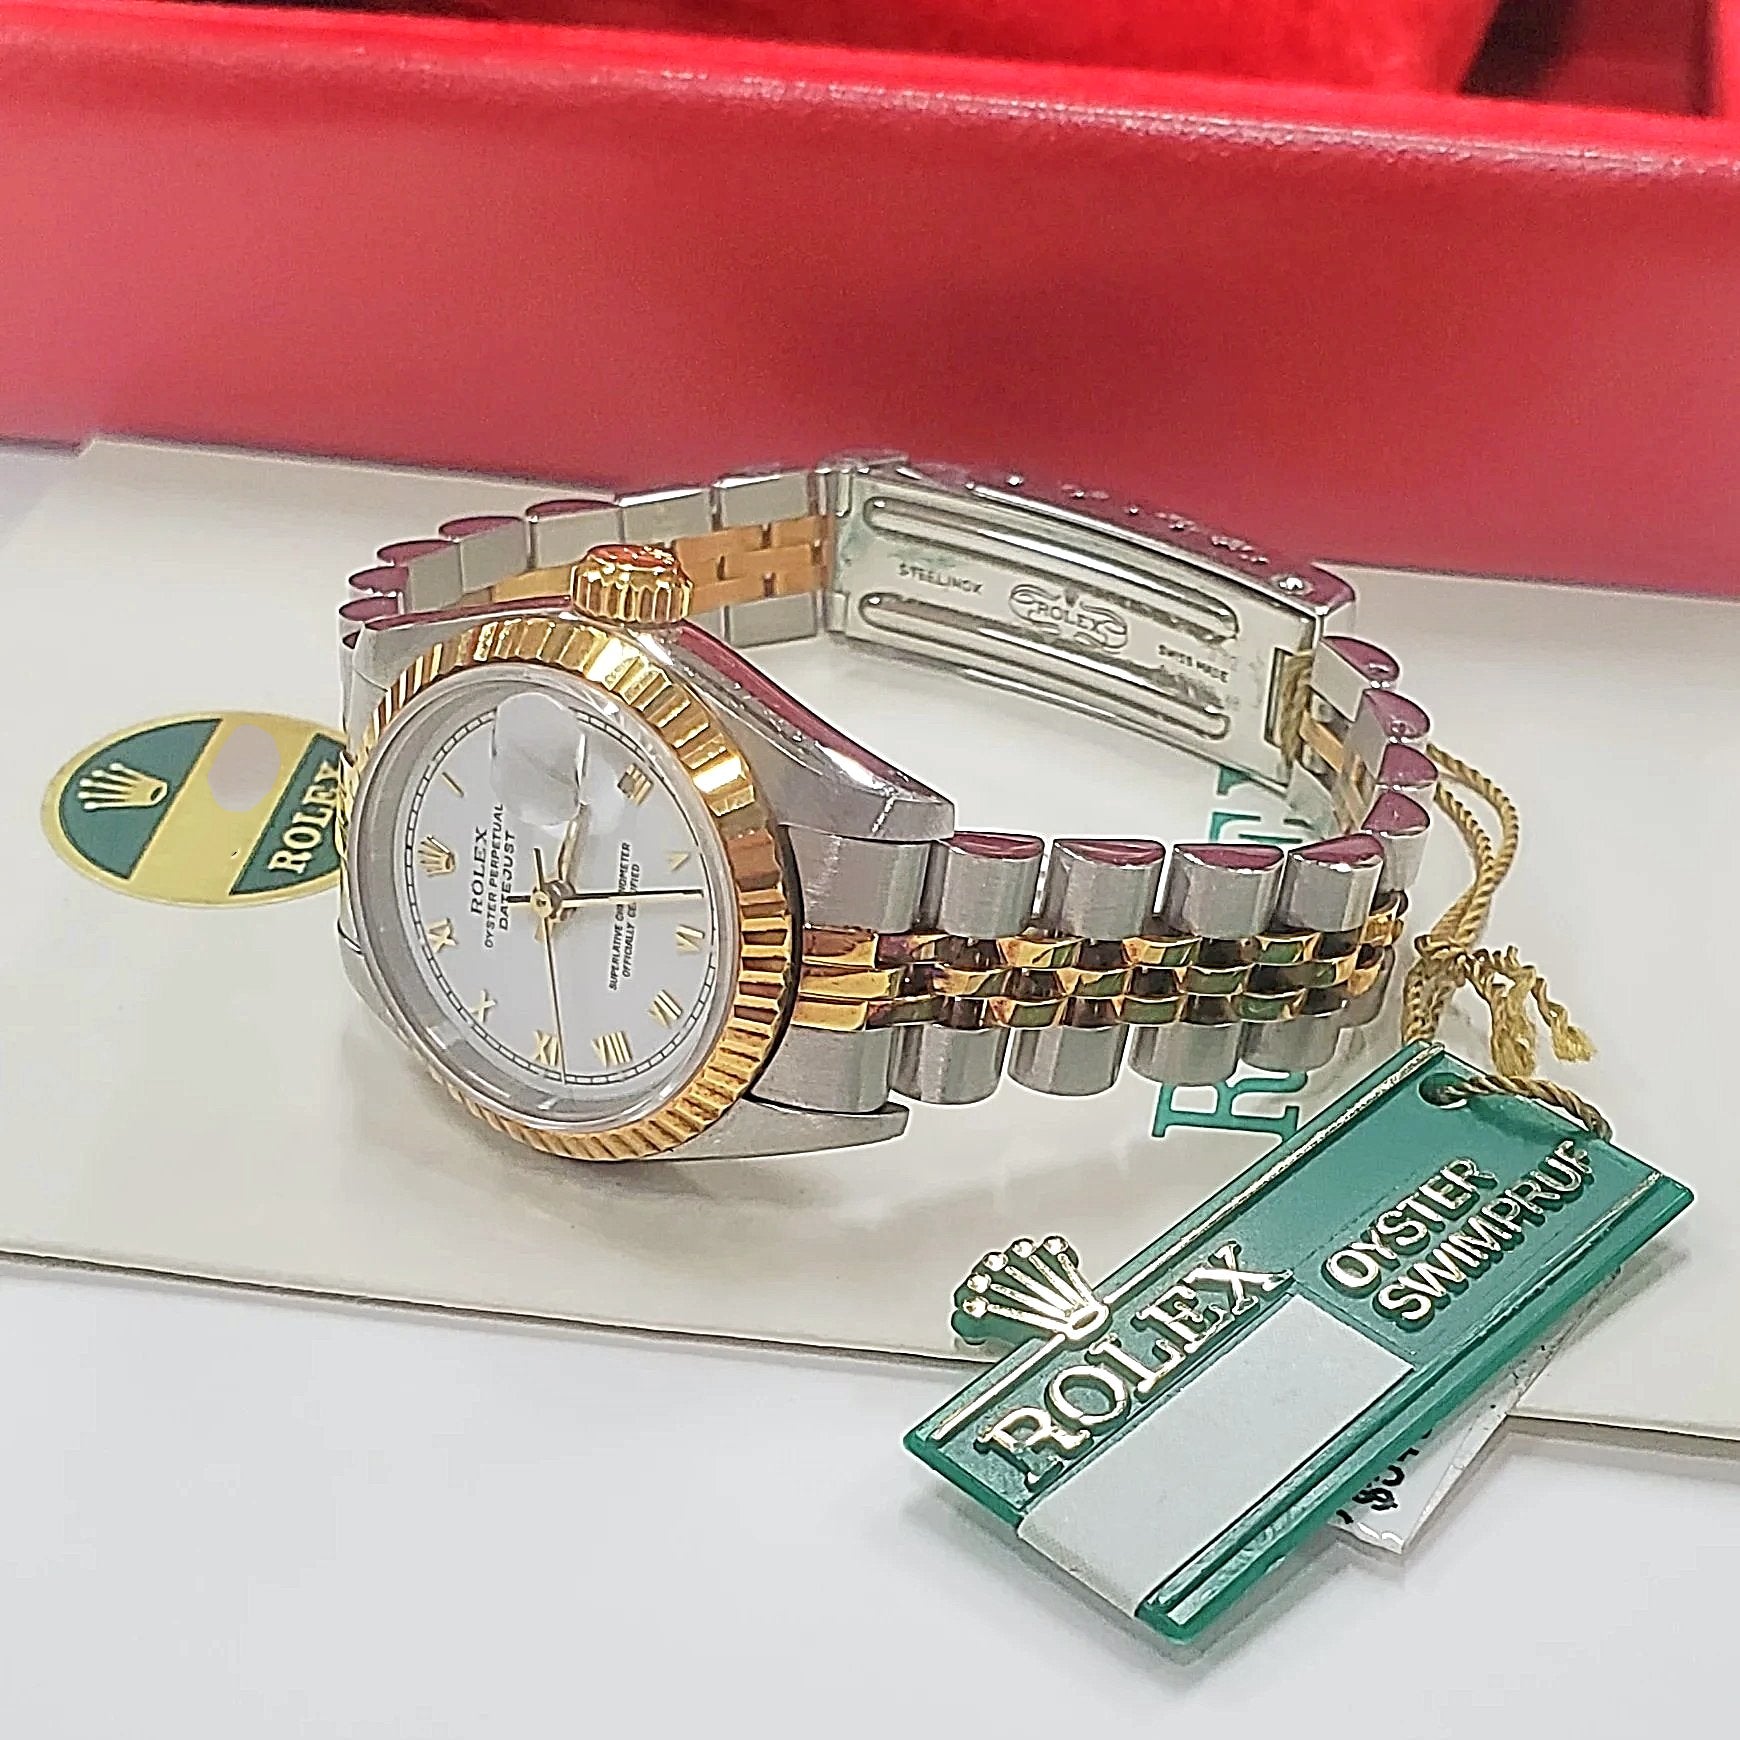 Women's Rolex 26mm DateJust Two-Tone 18K Gold Watch, with White Dial, Fluted Bezel, and Roman Numerals.